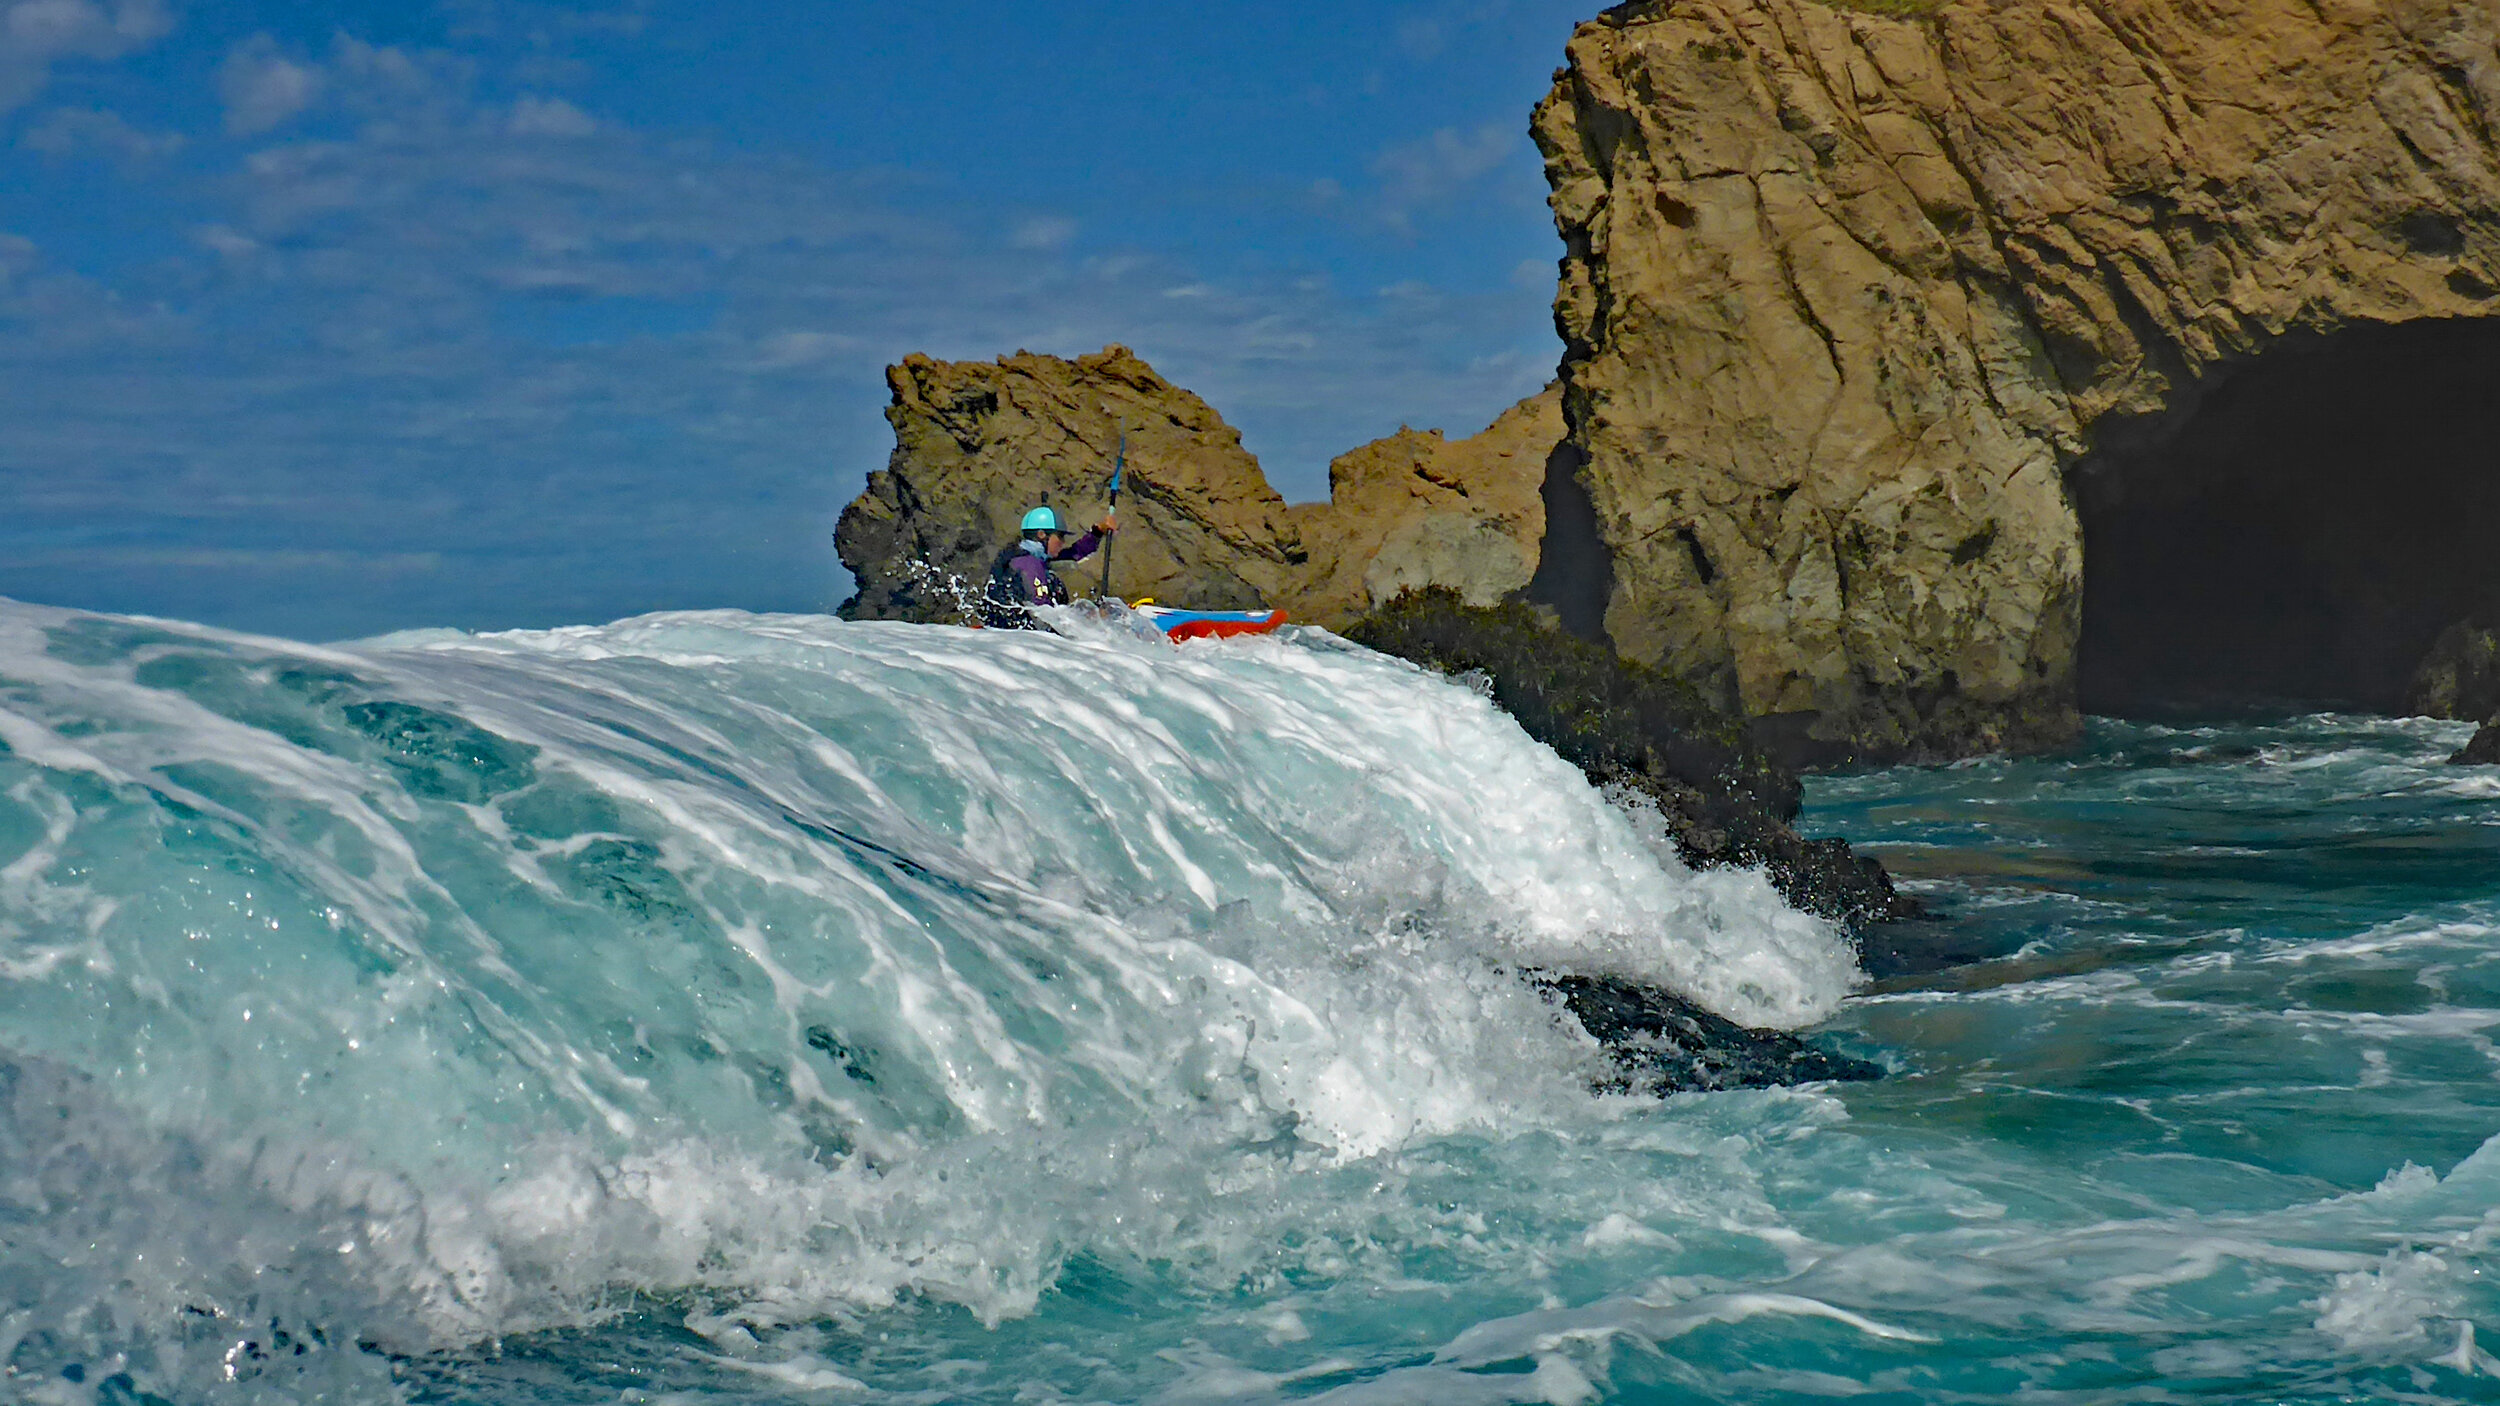 Owner, Cate Hawthorne, enjoying one of the many fun features on the Mendocino coast